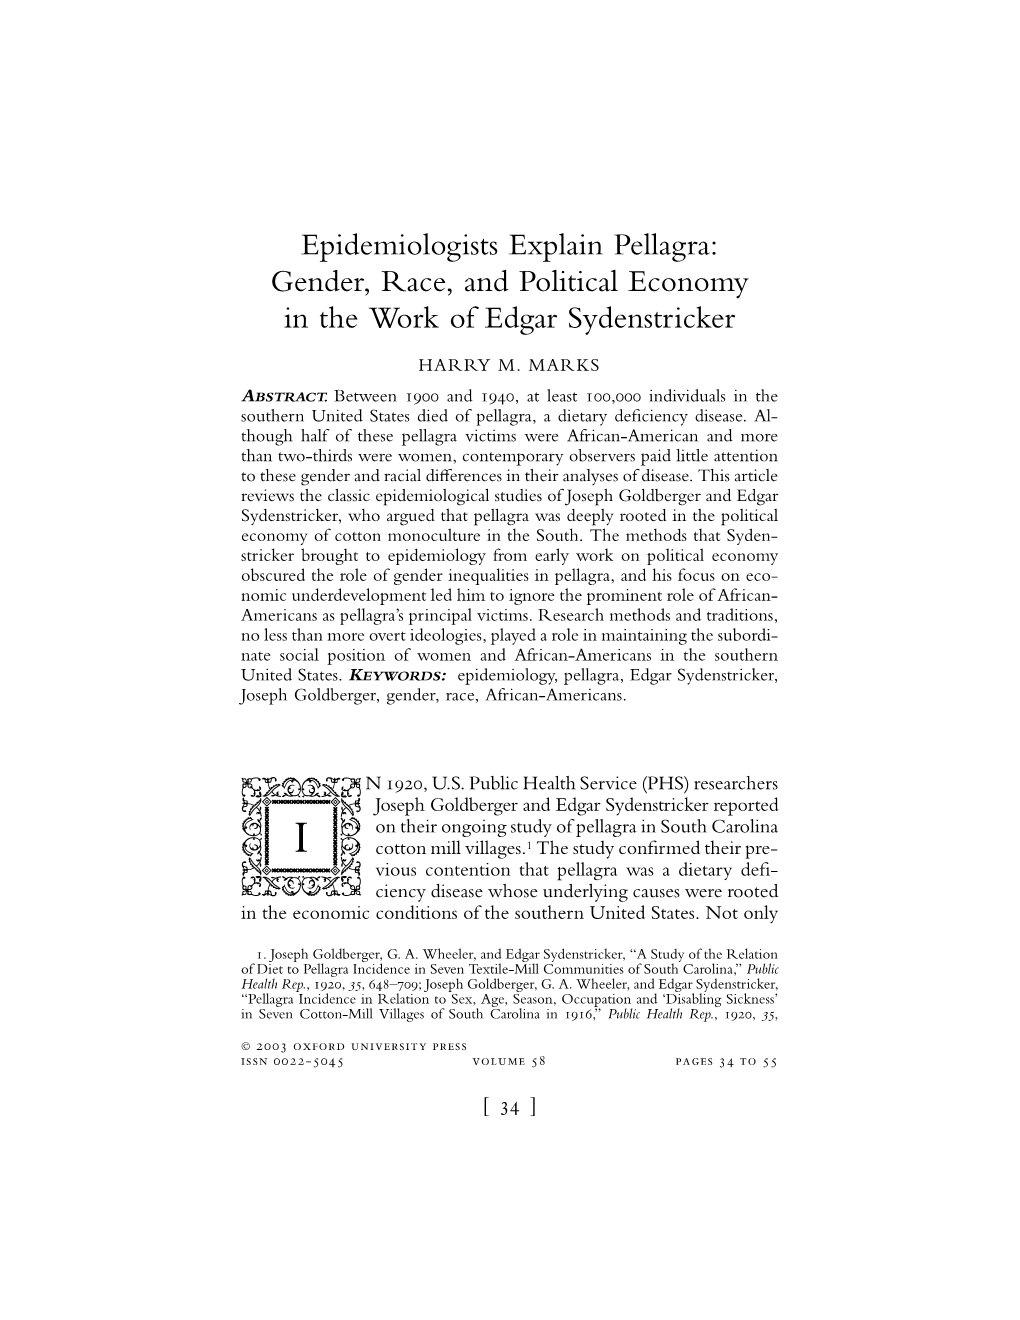 Epidemiologists Explain Pellagra: Gender, Race, and Political Economy in the Work of Edgar Sydenstricker